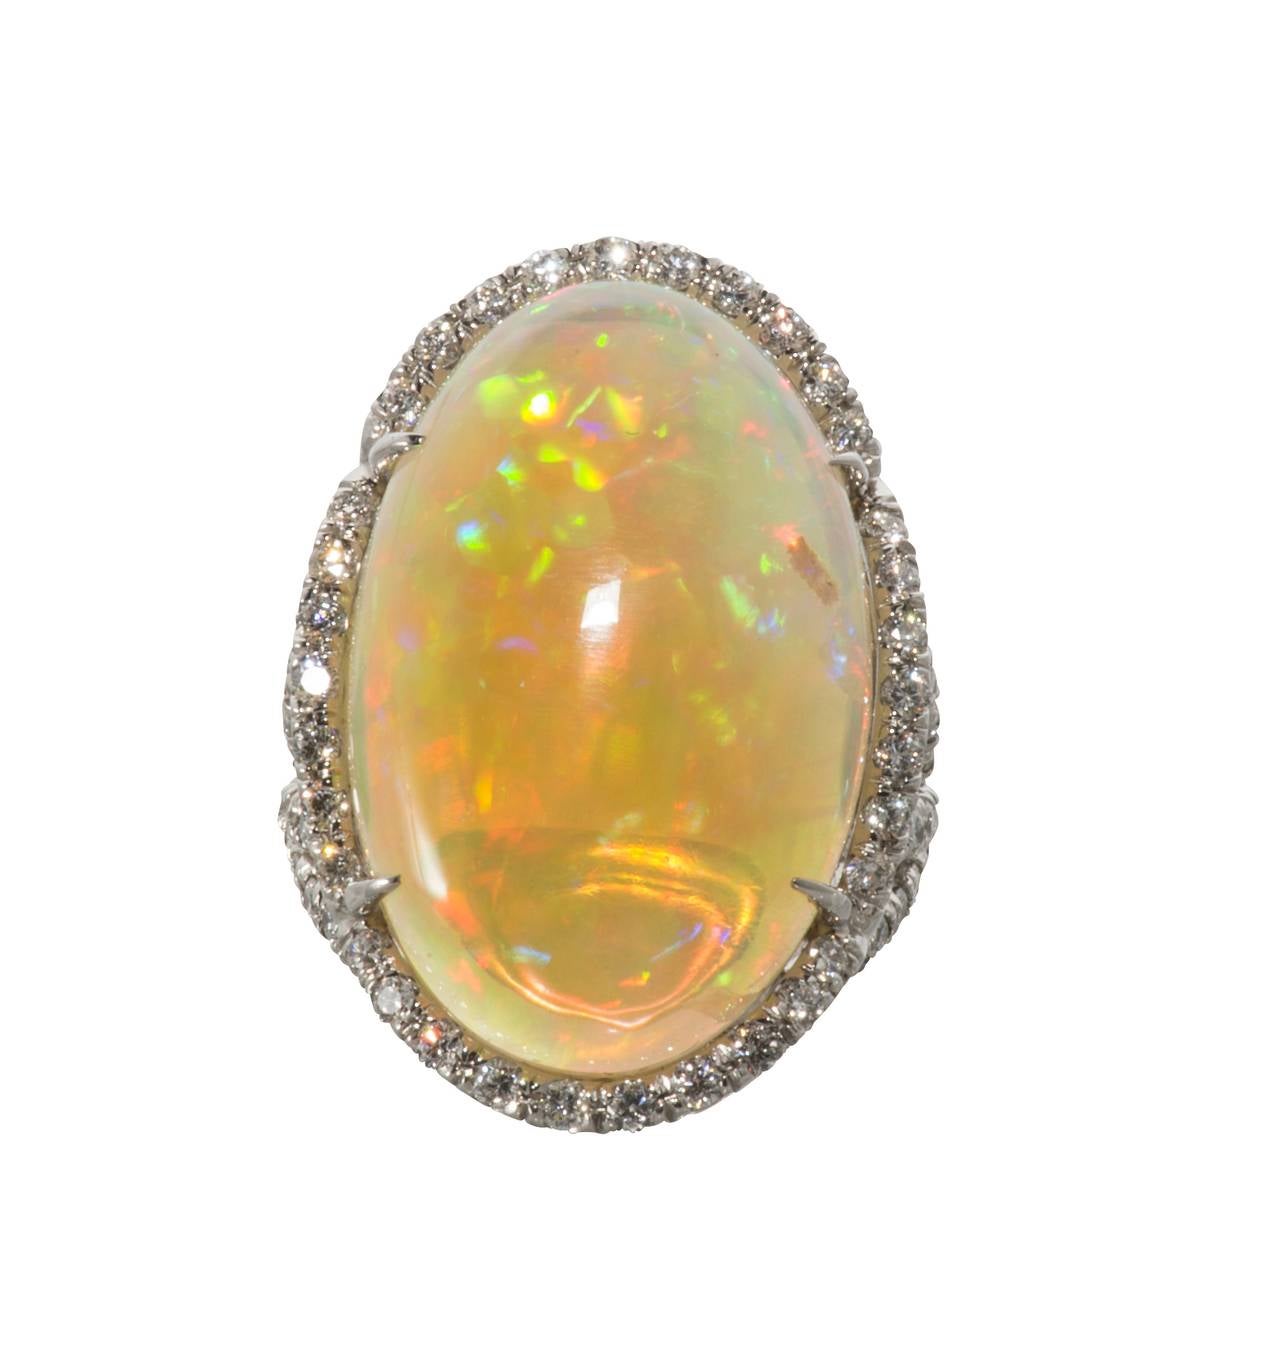 Spectacular Welo Opal and diamond cocktail ring set in platinum.